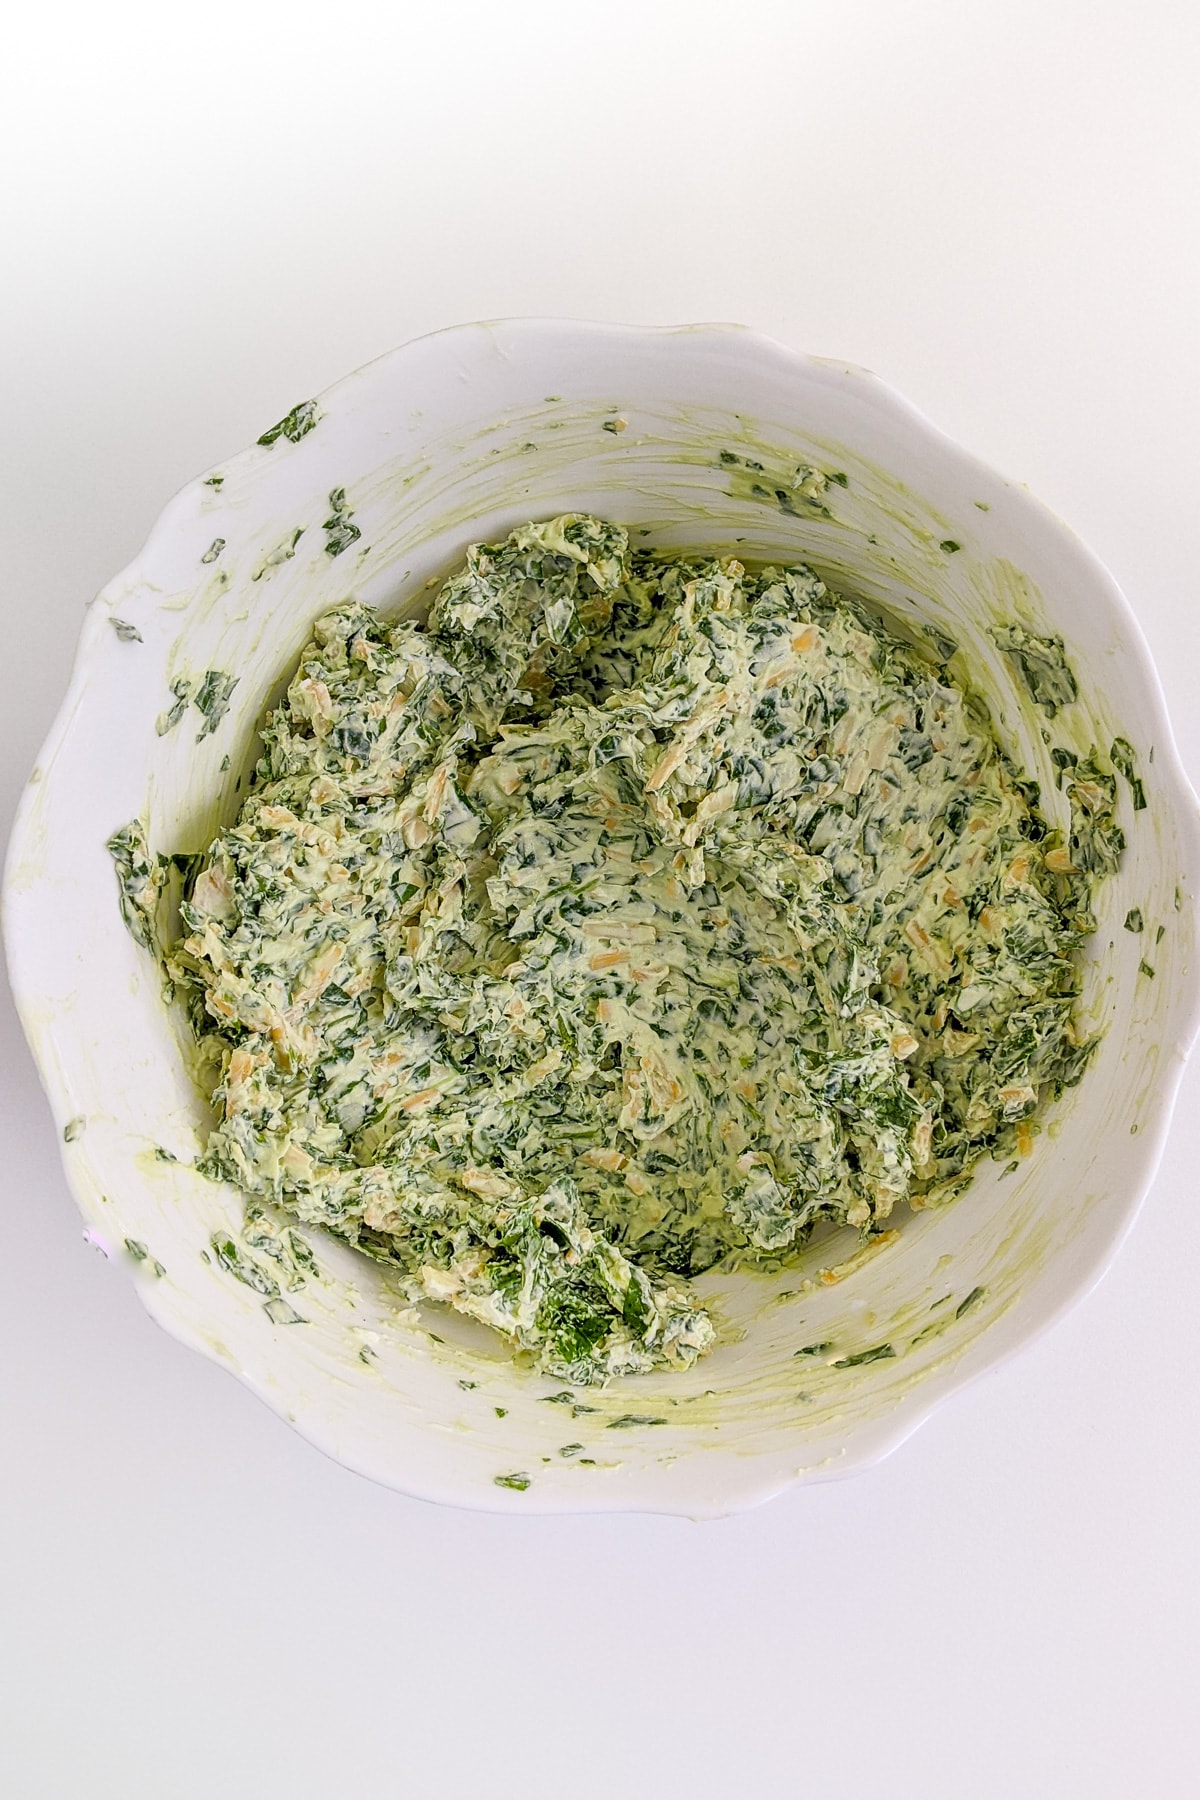 Top view of spinach dip mixture in a white plate.